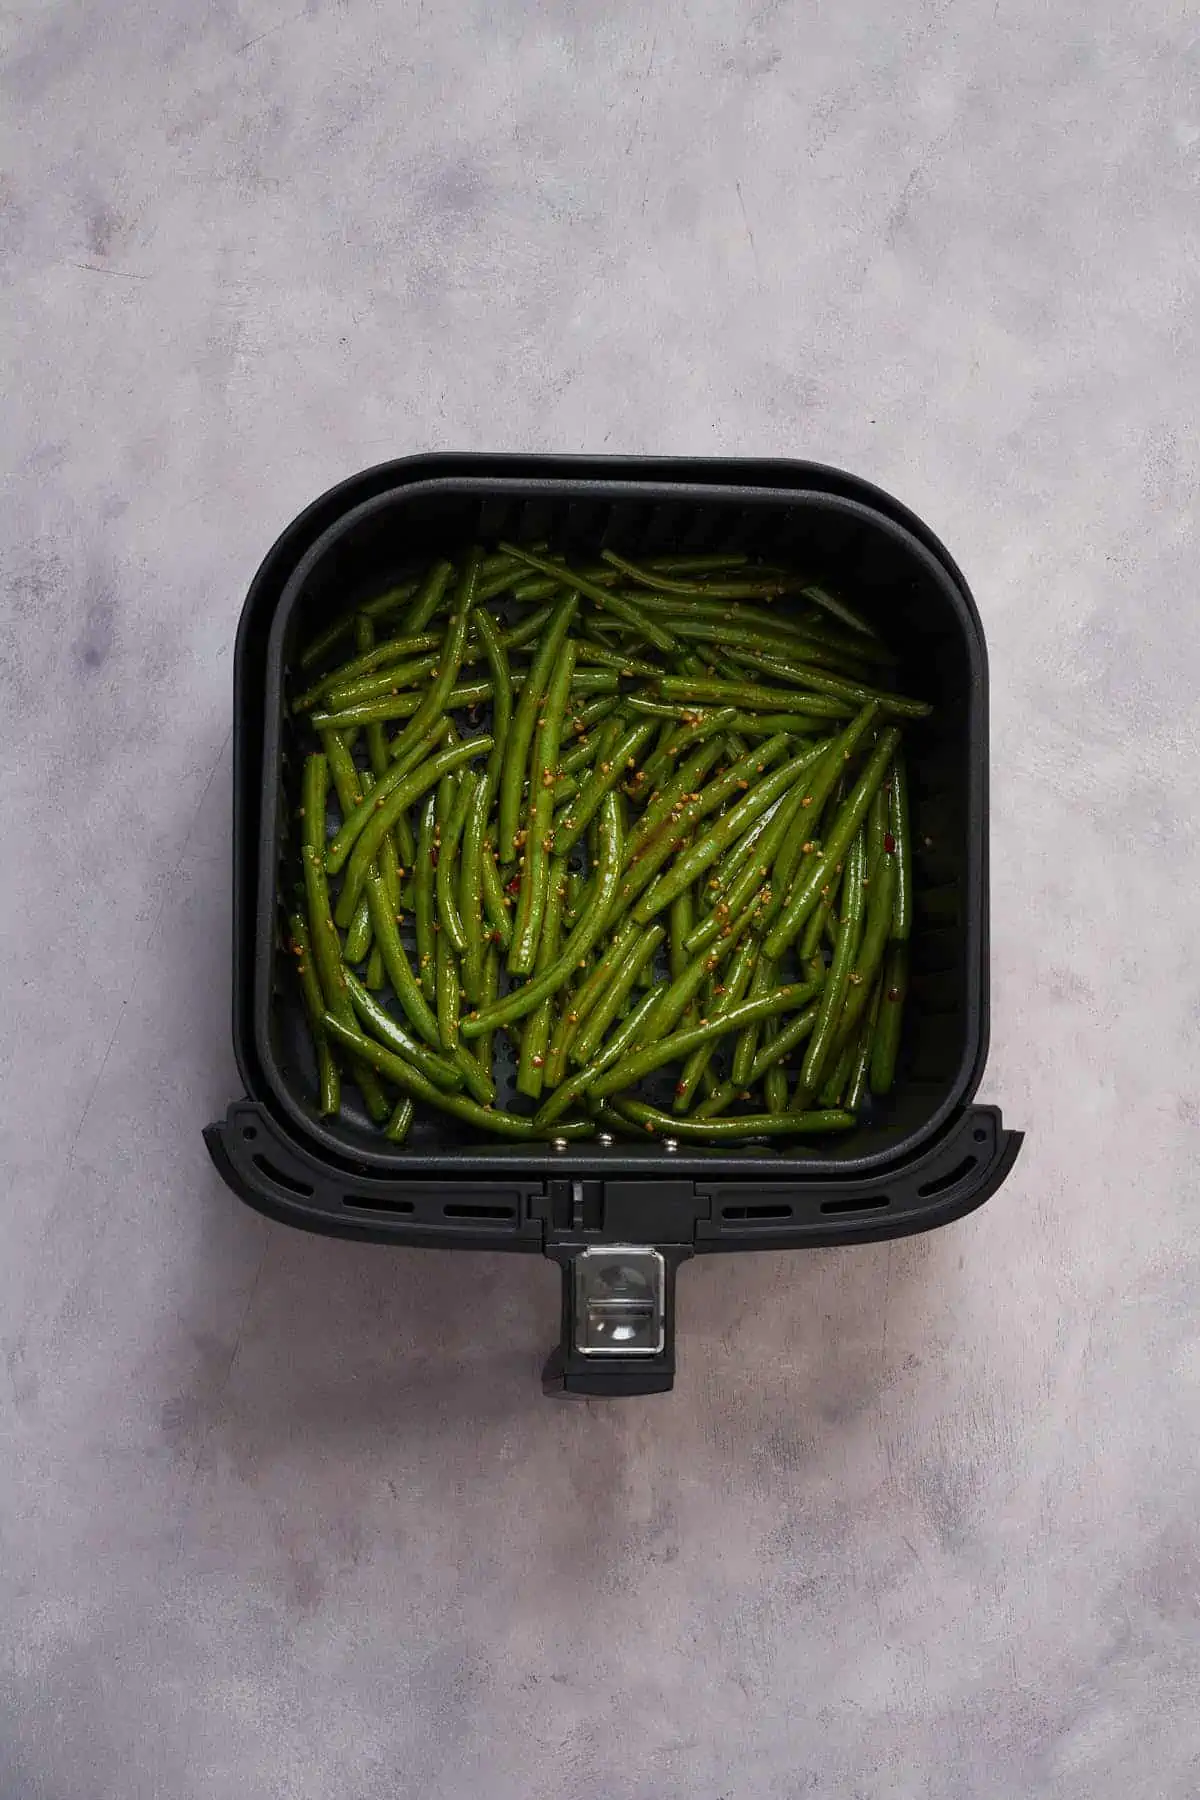 Green beans in the air fryer basket before cooking with spicy sauce.